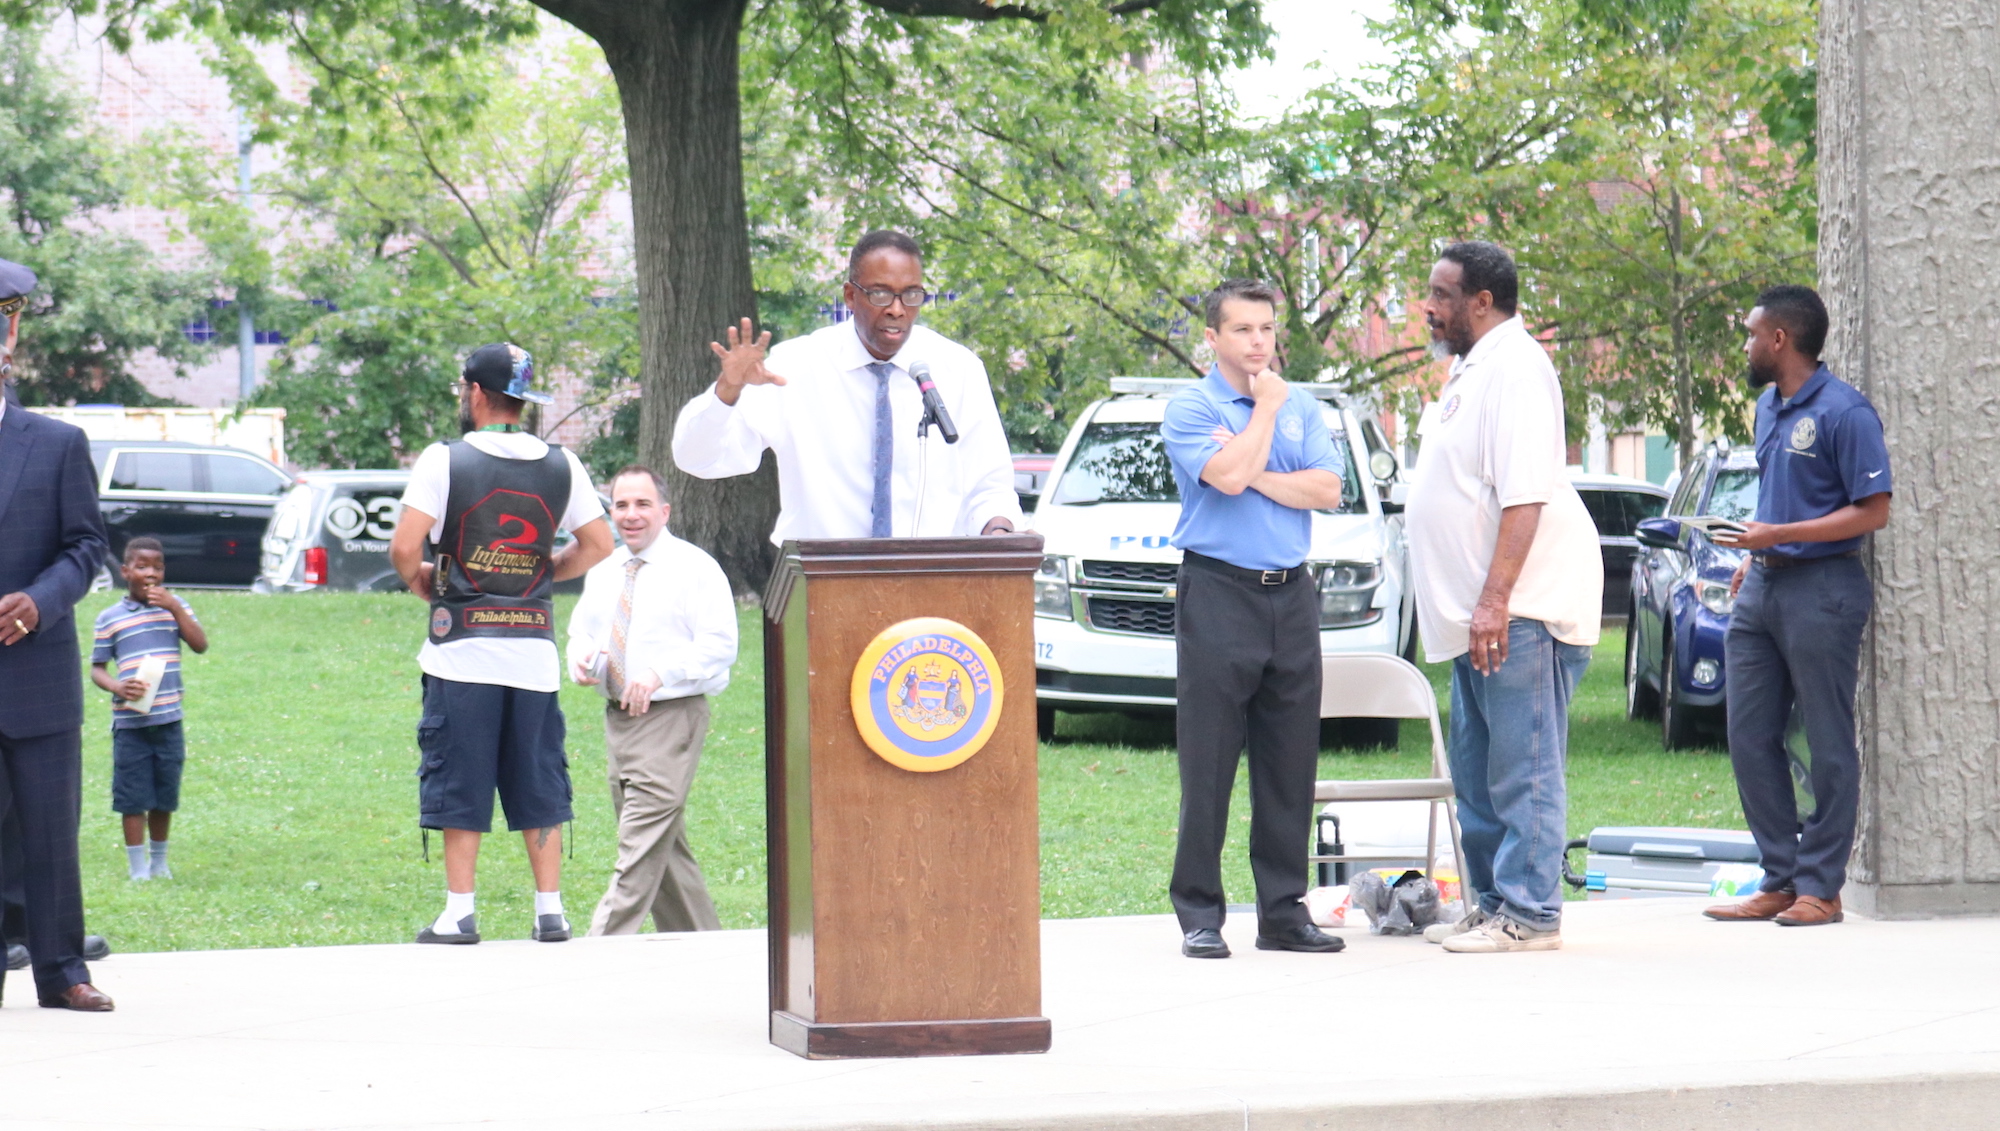 City Council President Darrell Clarke addresses the crowd at Fairhill Square Park on Aug. 5 for Philadelphia's National Night Out kick off event. Photo: Nigel Thompson/AL DÍA News